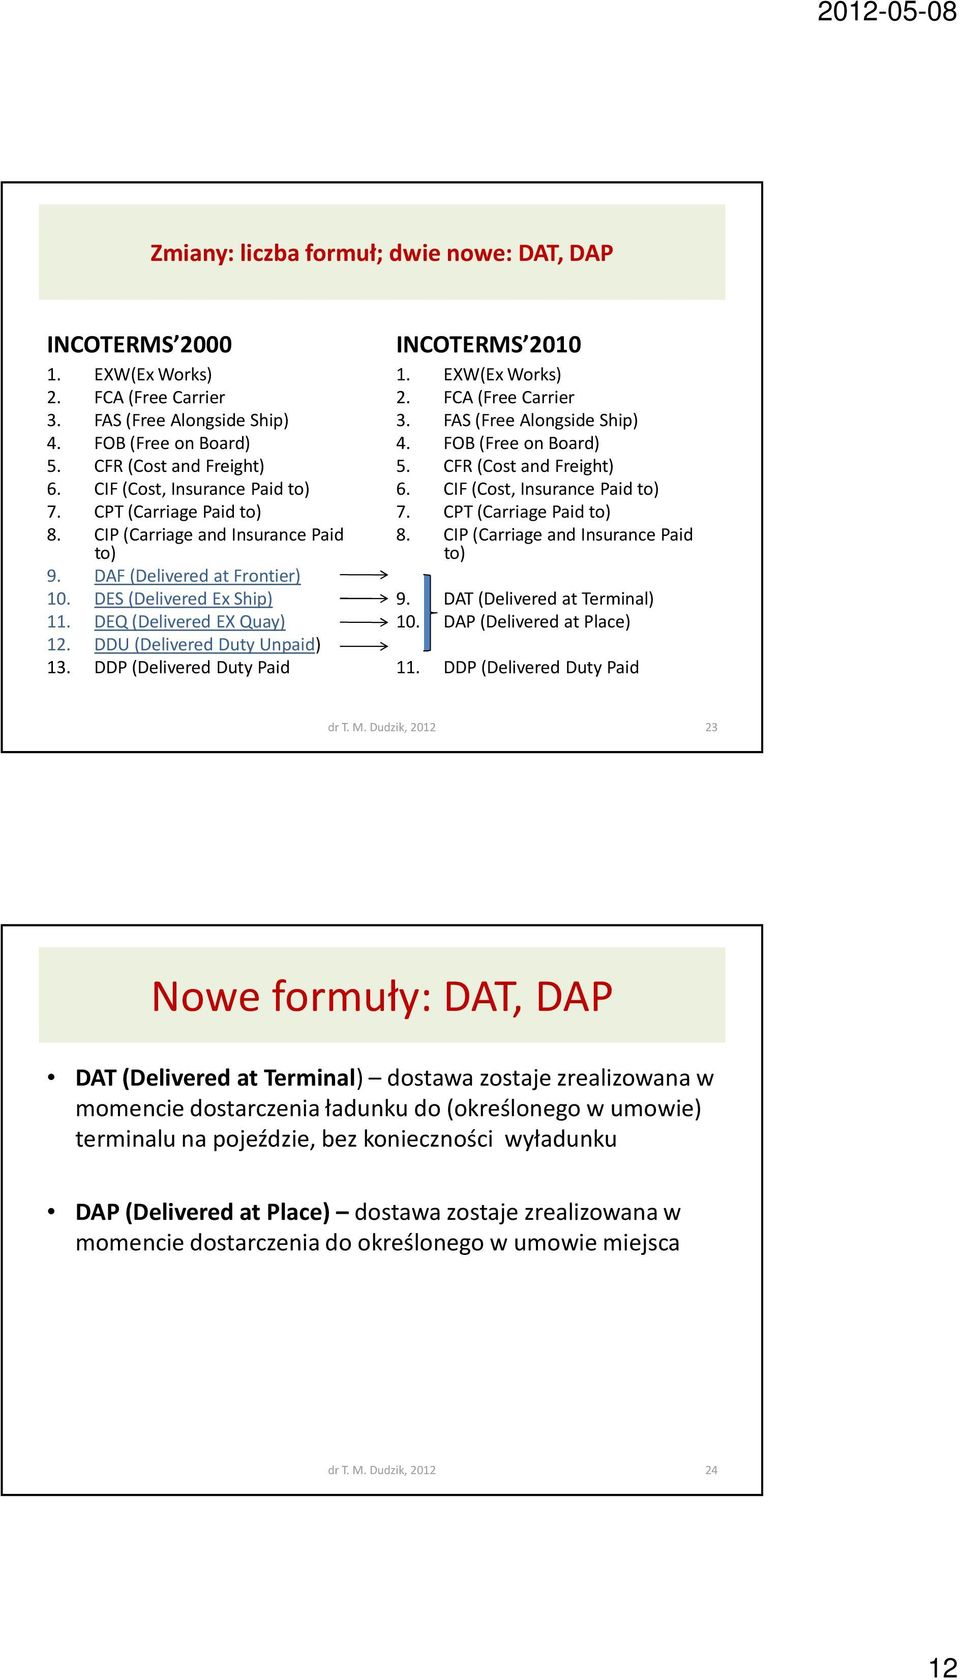 DDU (Delivered Duty Unpaid) 13. DDP (Delivered Duty Paid INCOTERMS 2010 1. EXW(Ex Works) 2. FCA (Free Carrier 3. FAS (Free Alongside Ship) 4. FOB (Free on Board) 5. CFR (Cost and Freight) 6.